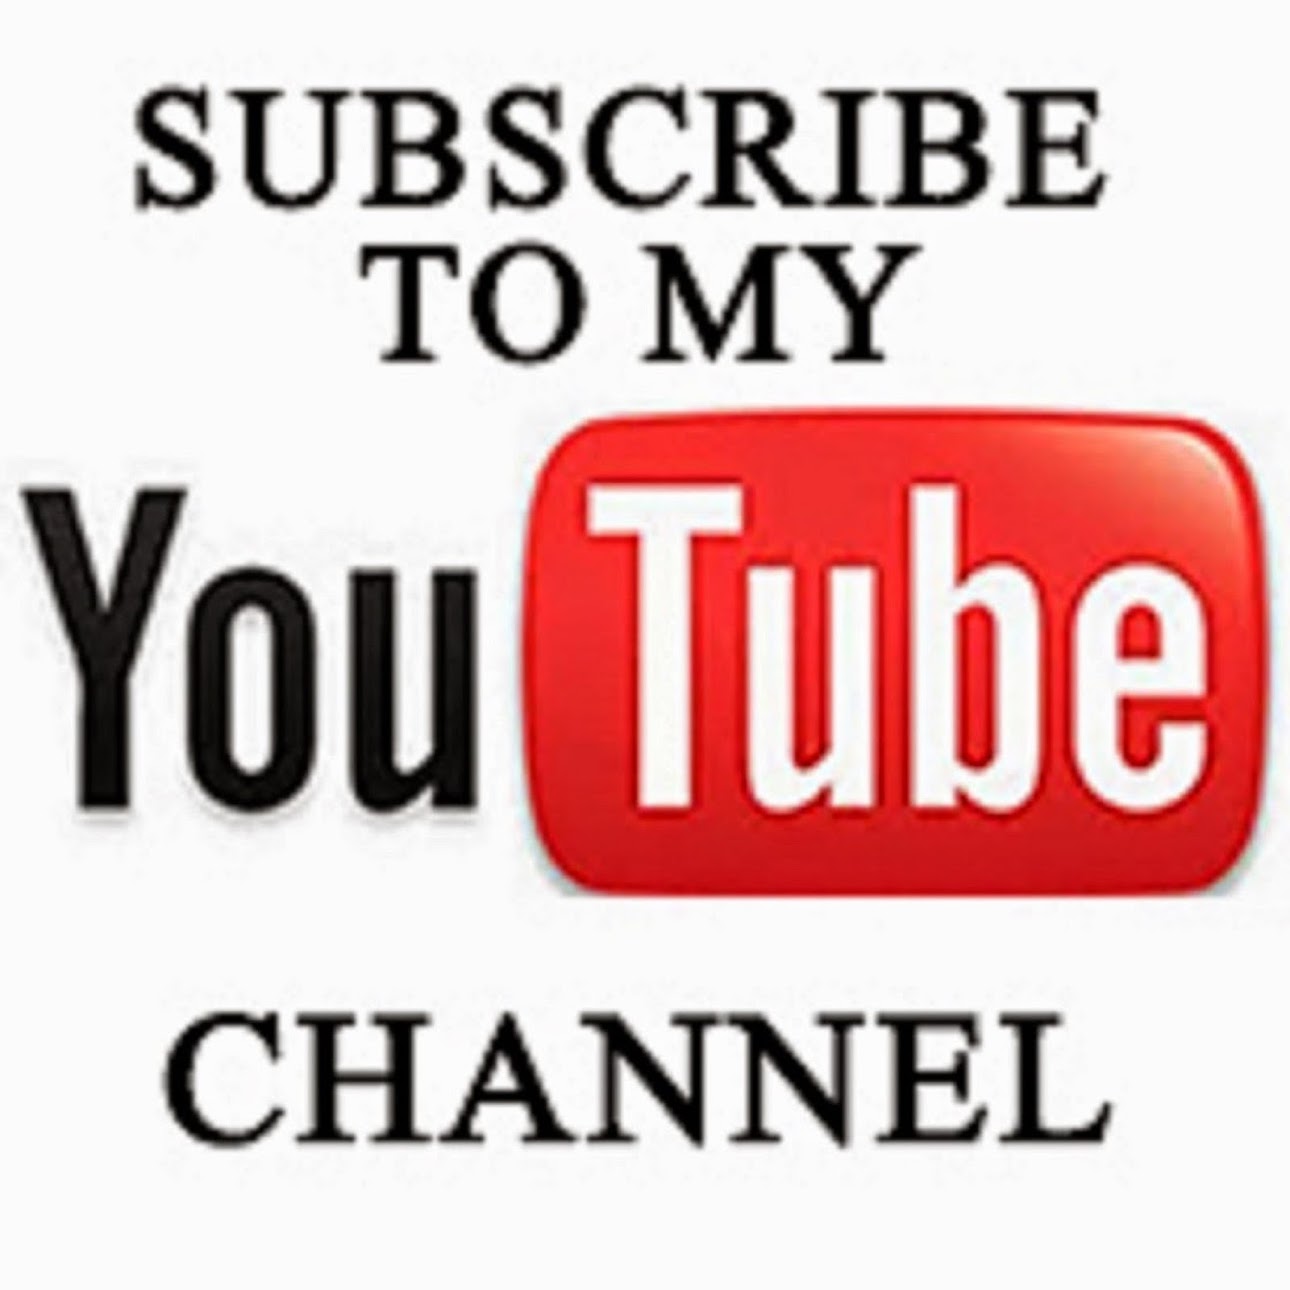 SUBSCRIBE TO MY YOUTUBE CHANNEL